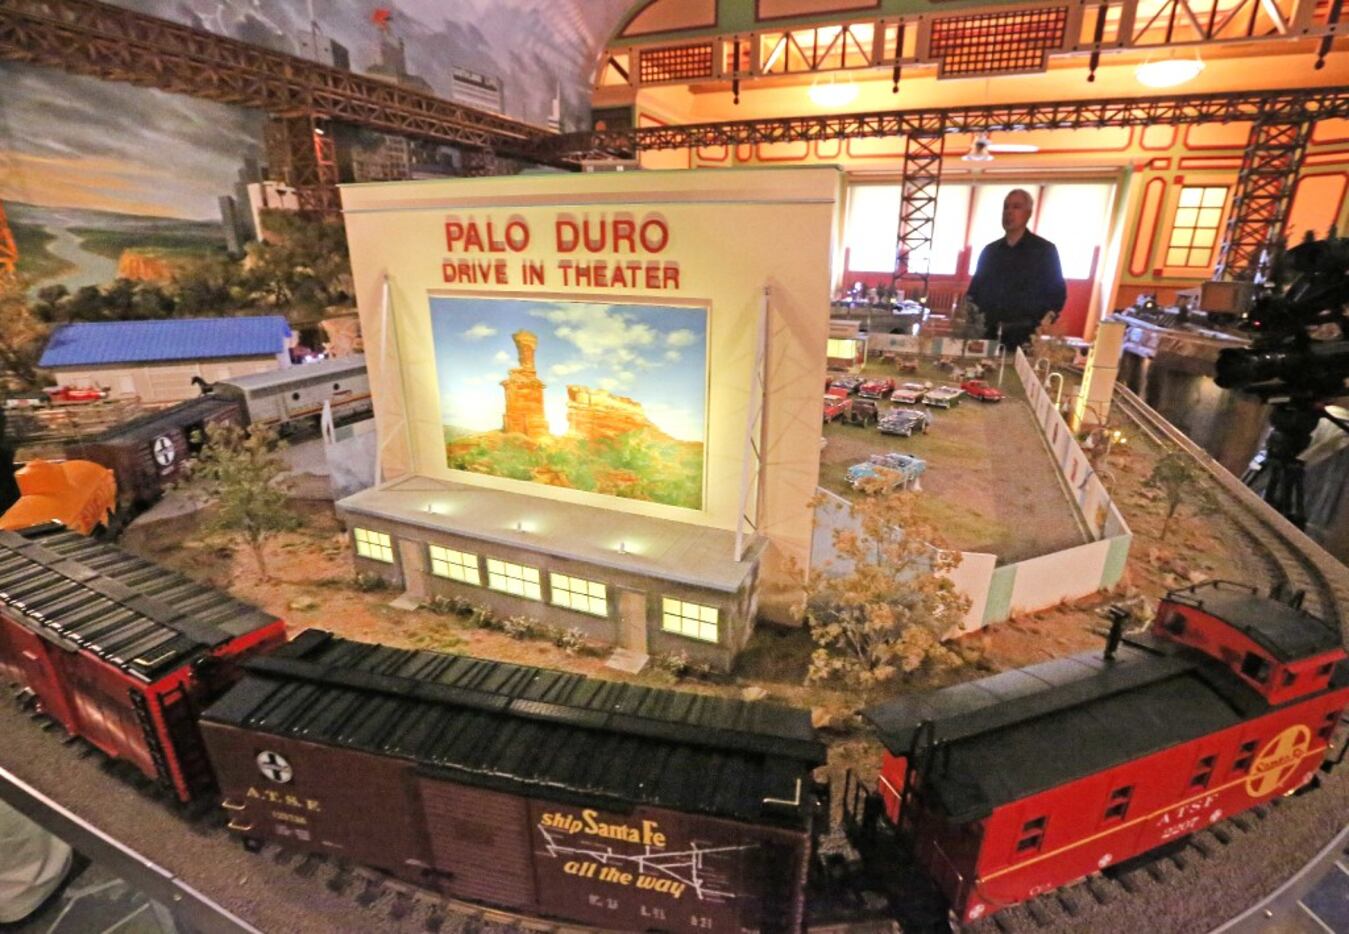 The West Texas section of the Sanders model train display includes a working drive-in movie...